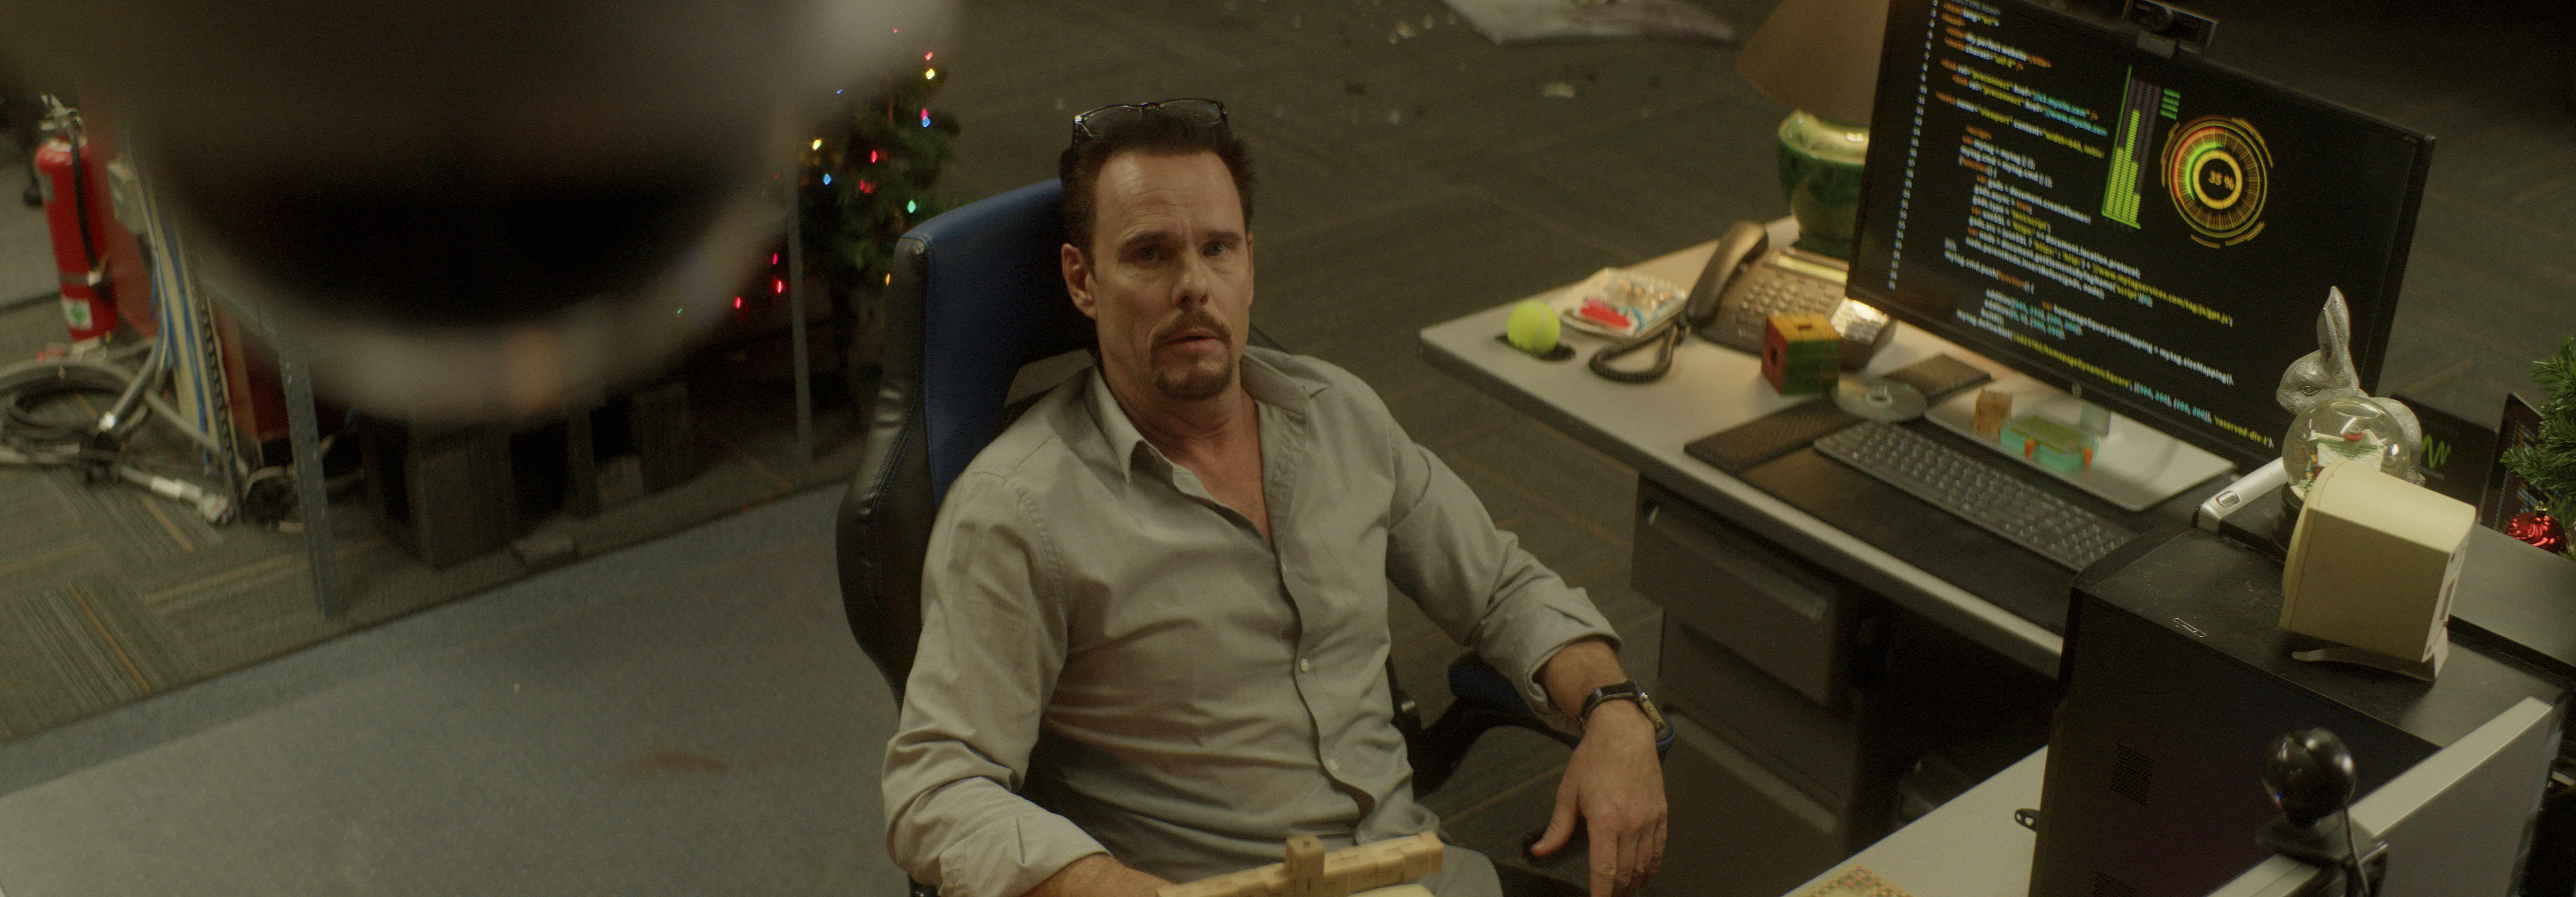 Kevin Dillon Talks About Action Scene In Hot Seat And More! [Exclusive Interview]